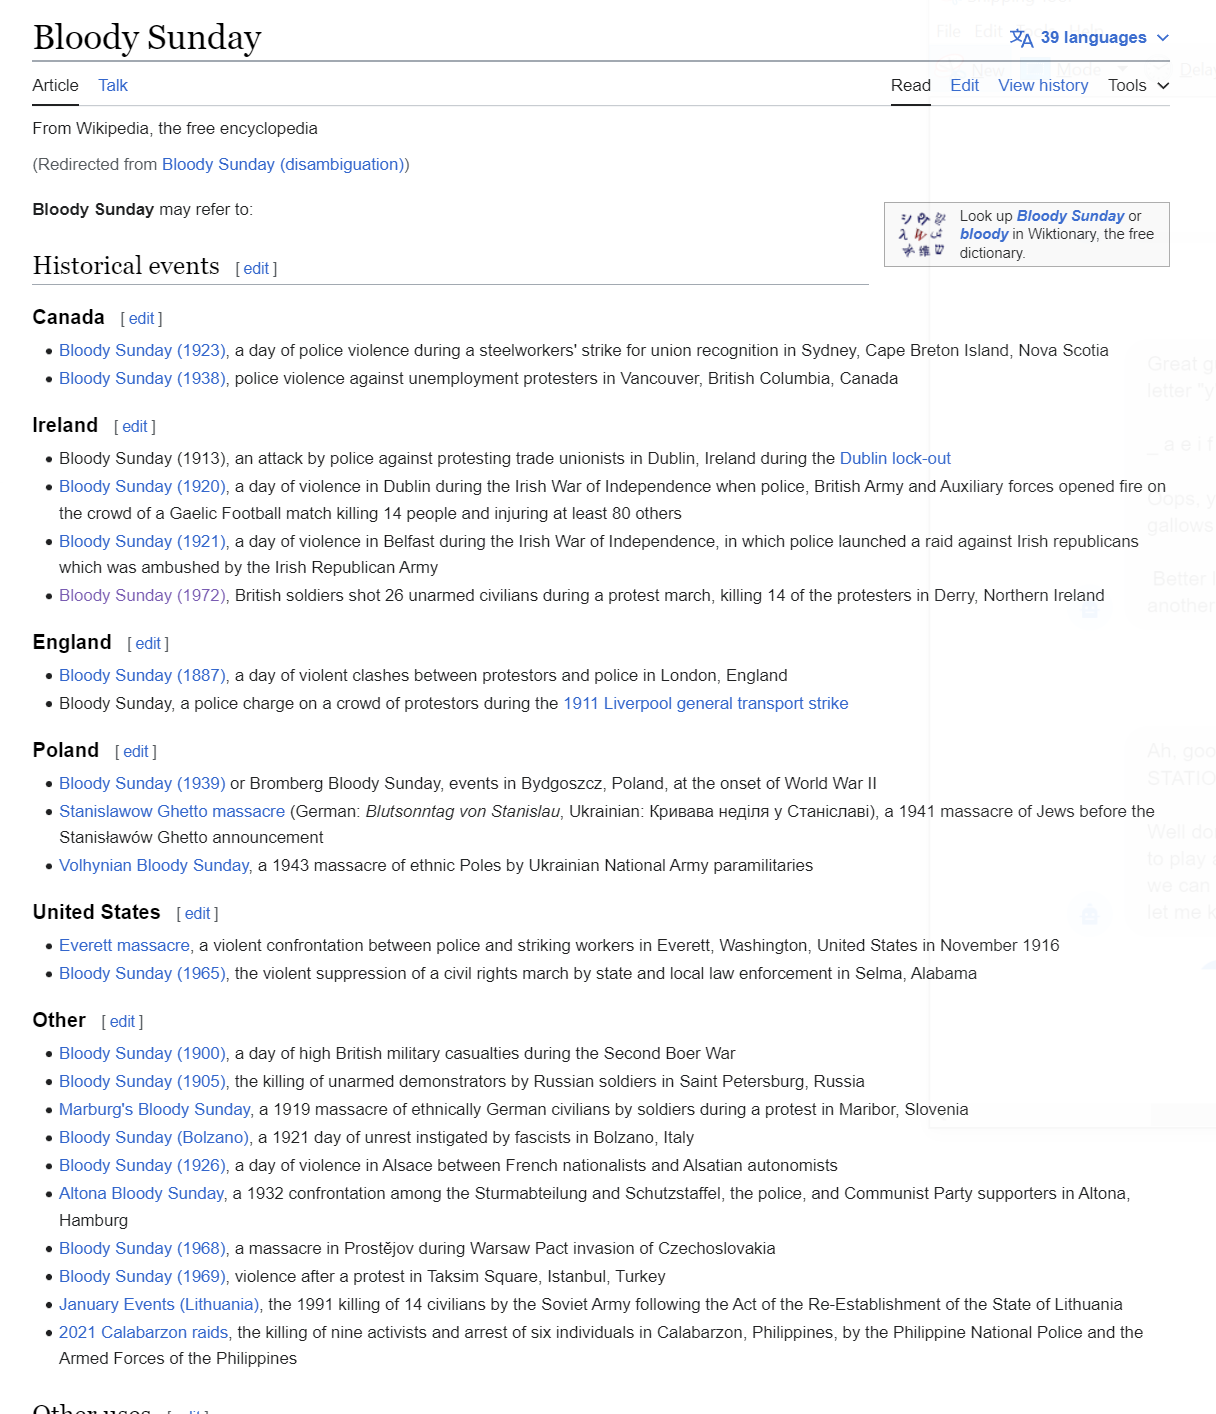 lock - Wiktionary, the free dictionary